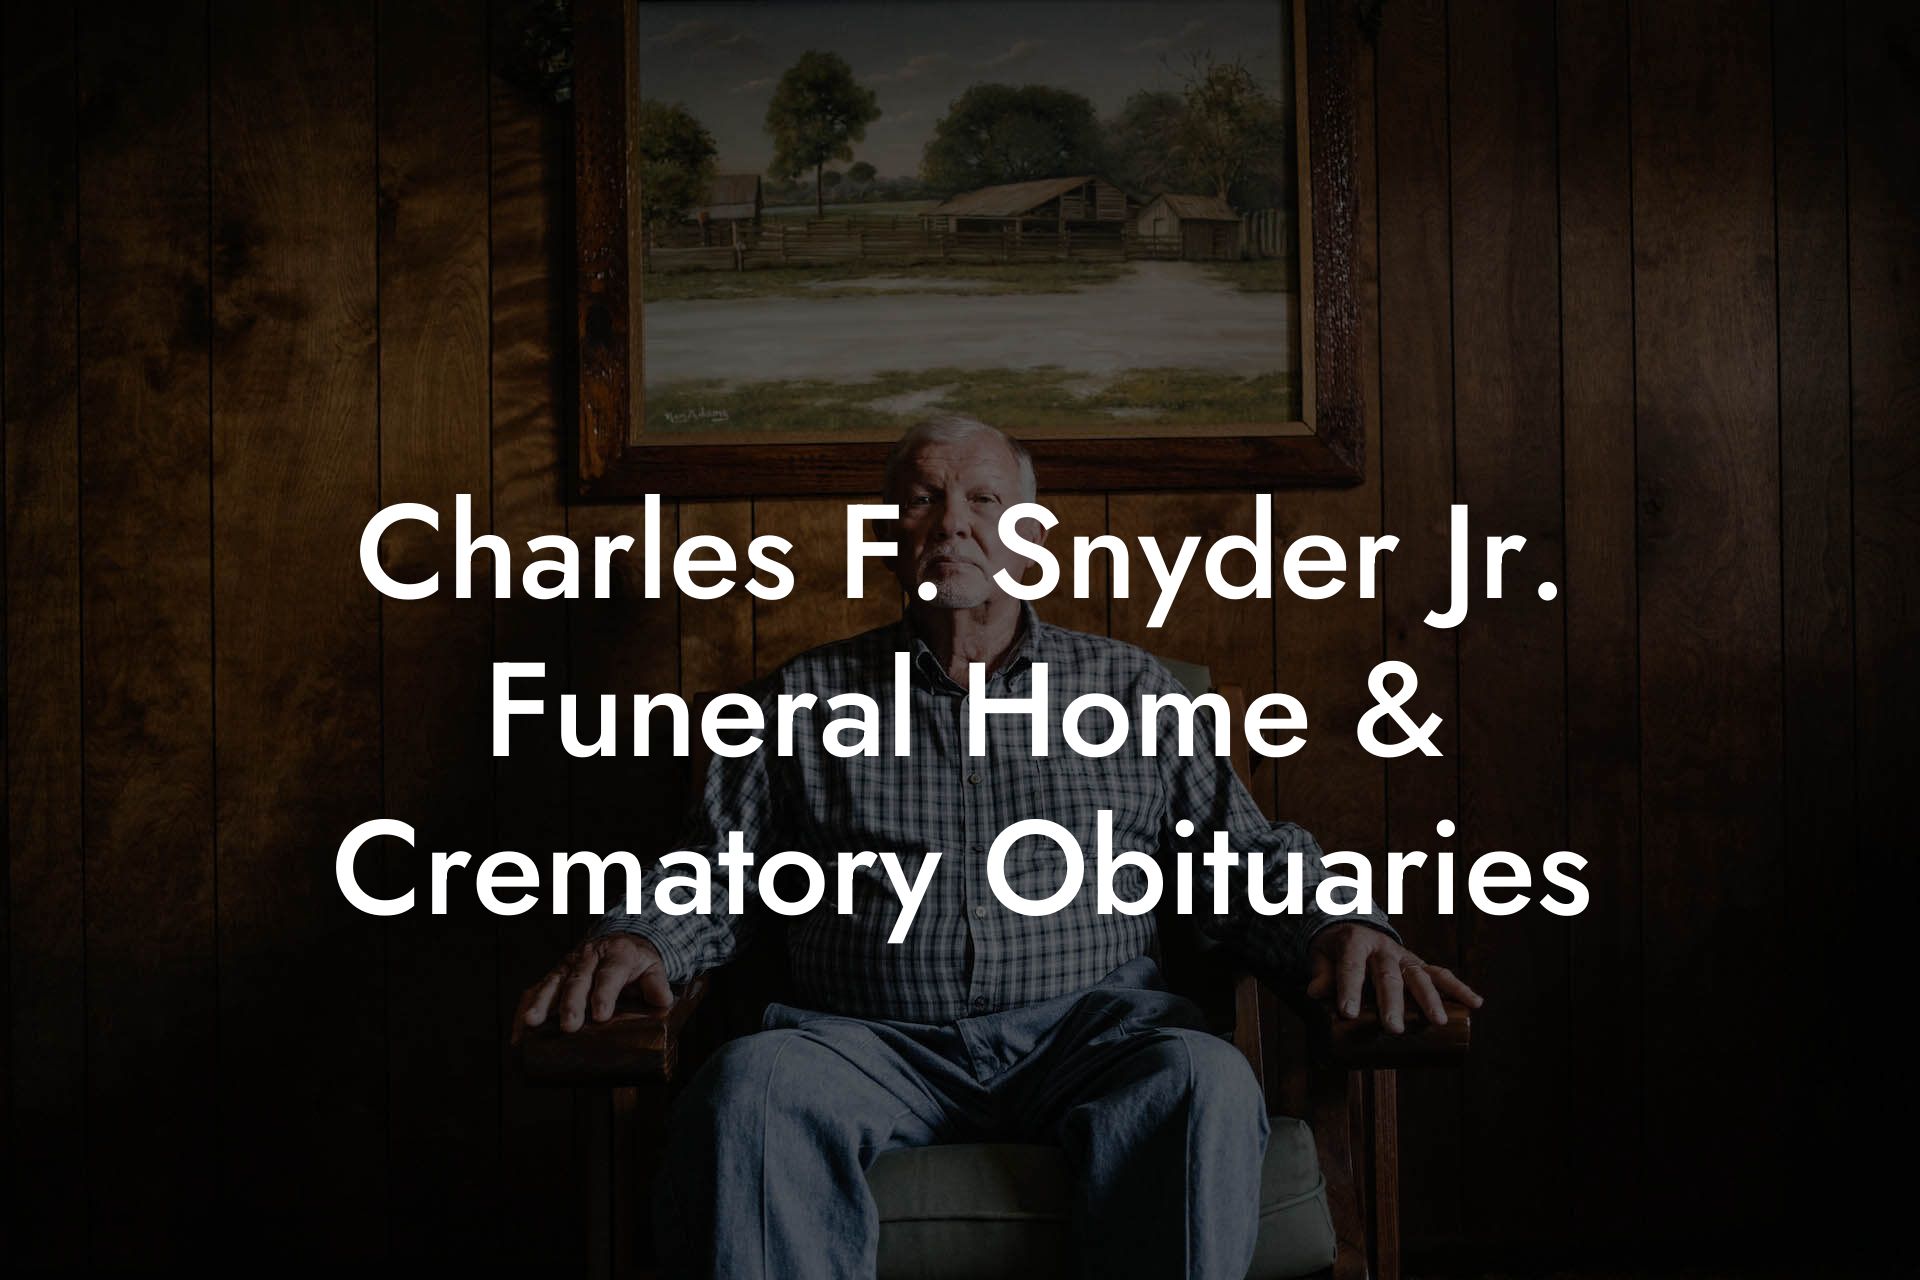 Charles F. Snyder Jr. Funeral Home & Crematory Obituaries